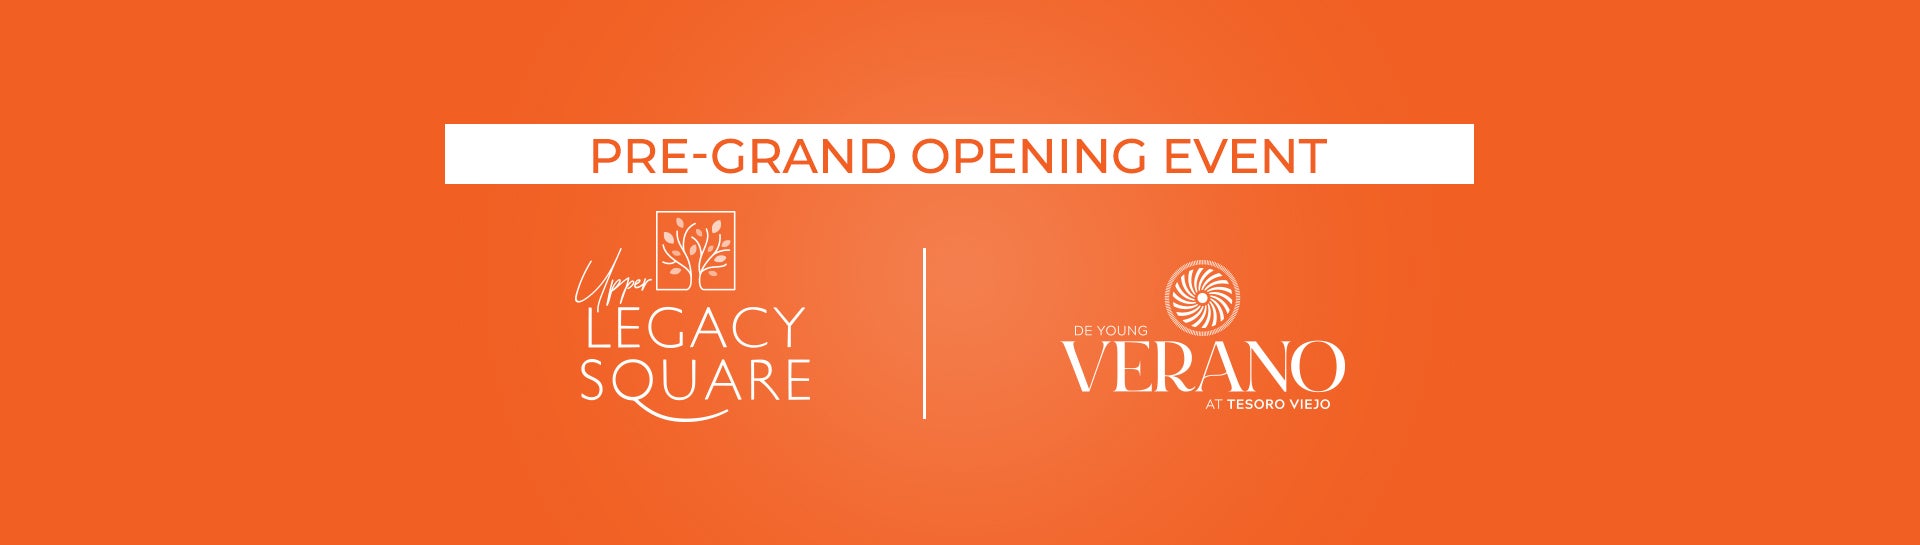 De Young Properties Communities Are Active – Two Floorplan Collections & Two Pre-Grand Opening Events on November 20!